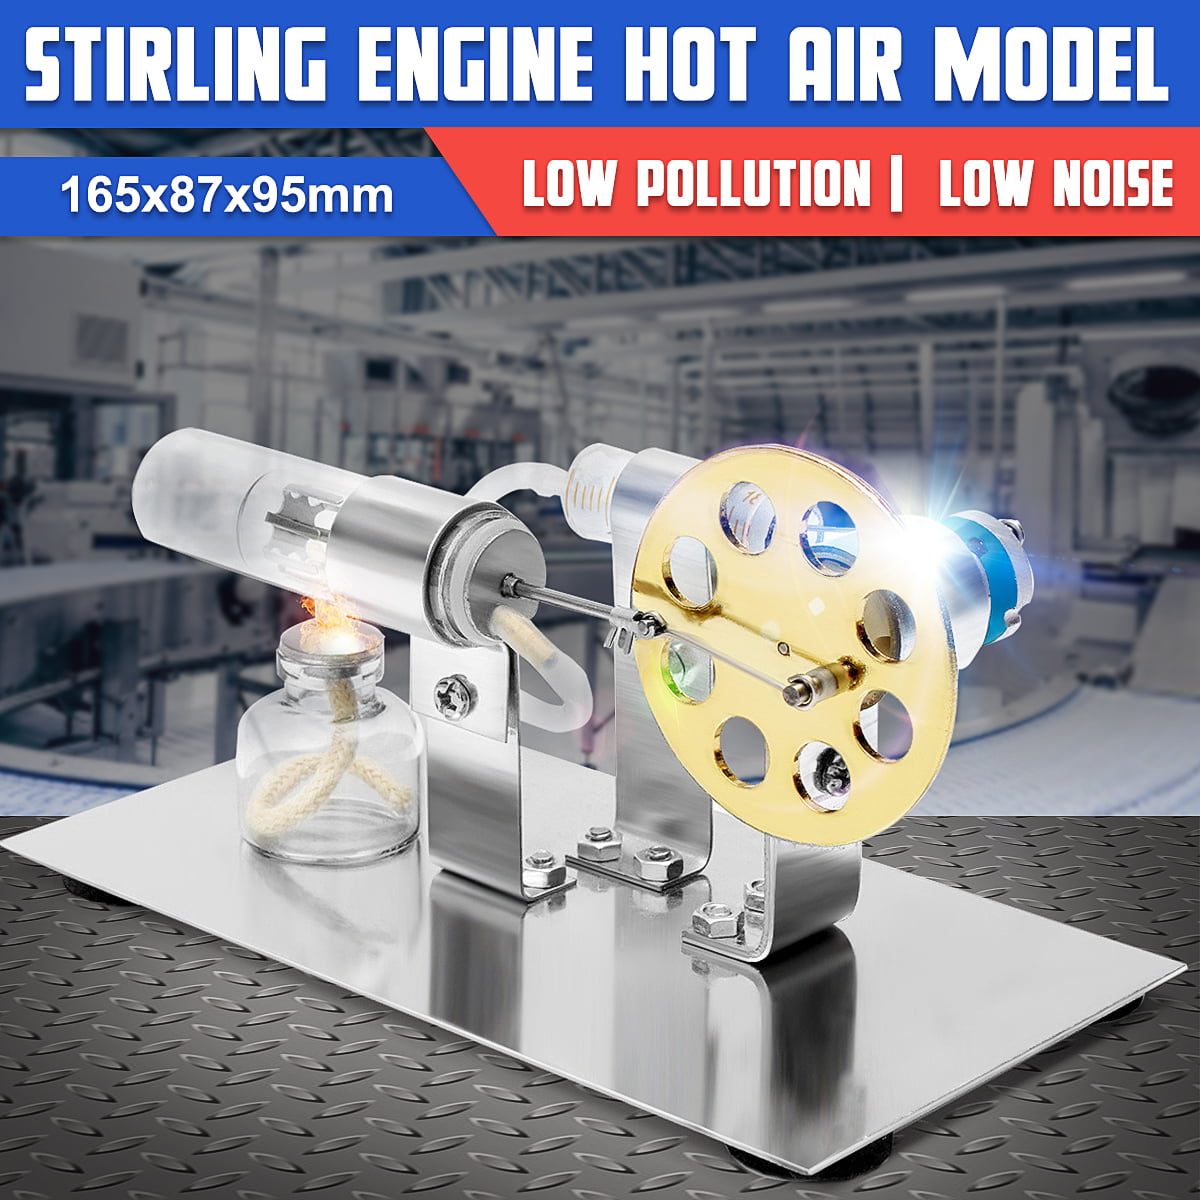 Goodlife623 New Mini Stirling Engine Model Hot Air Steam Powered Toy Physics Experiment 